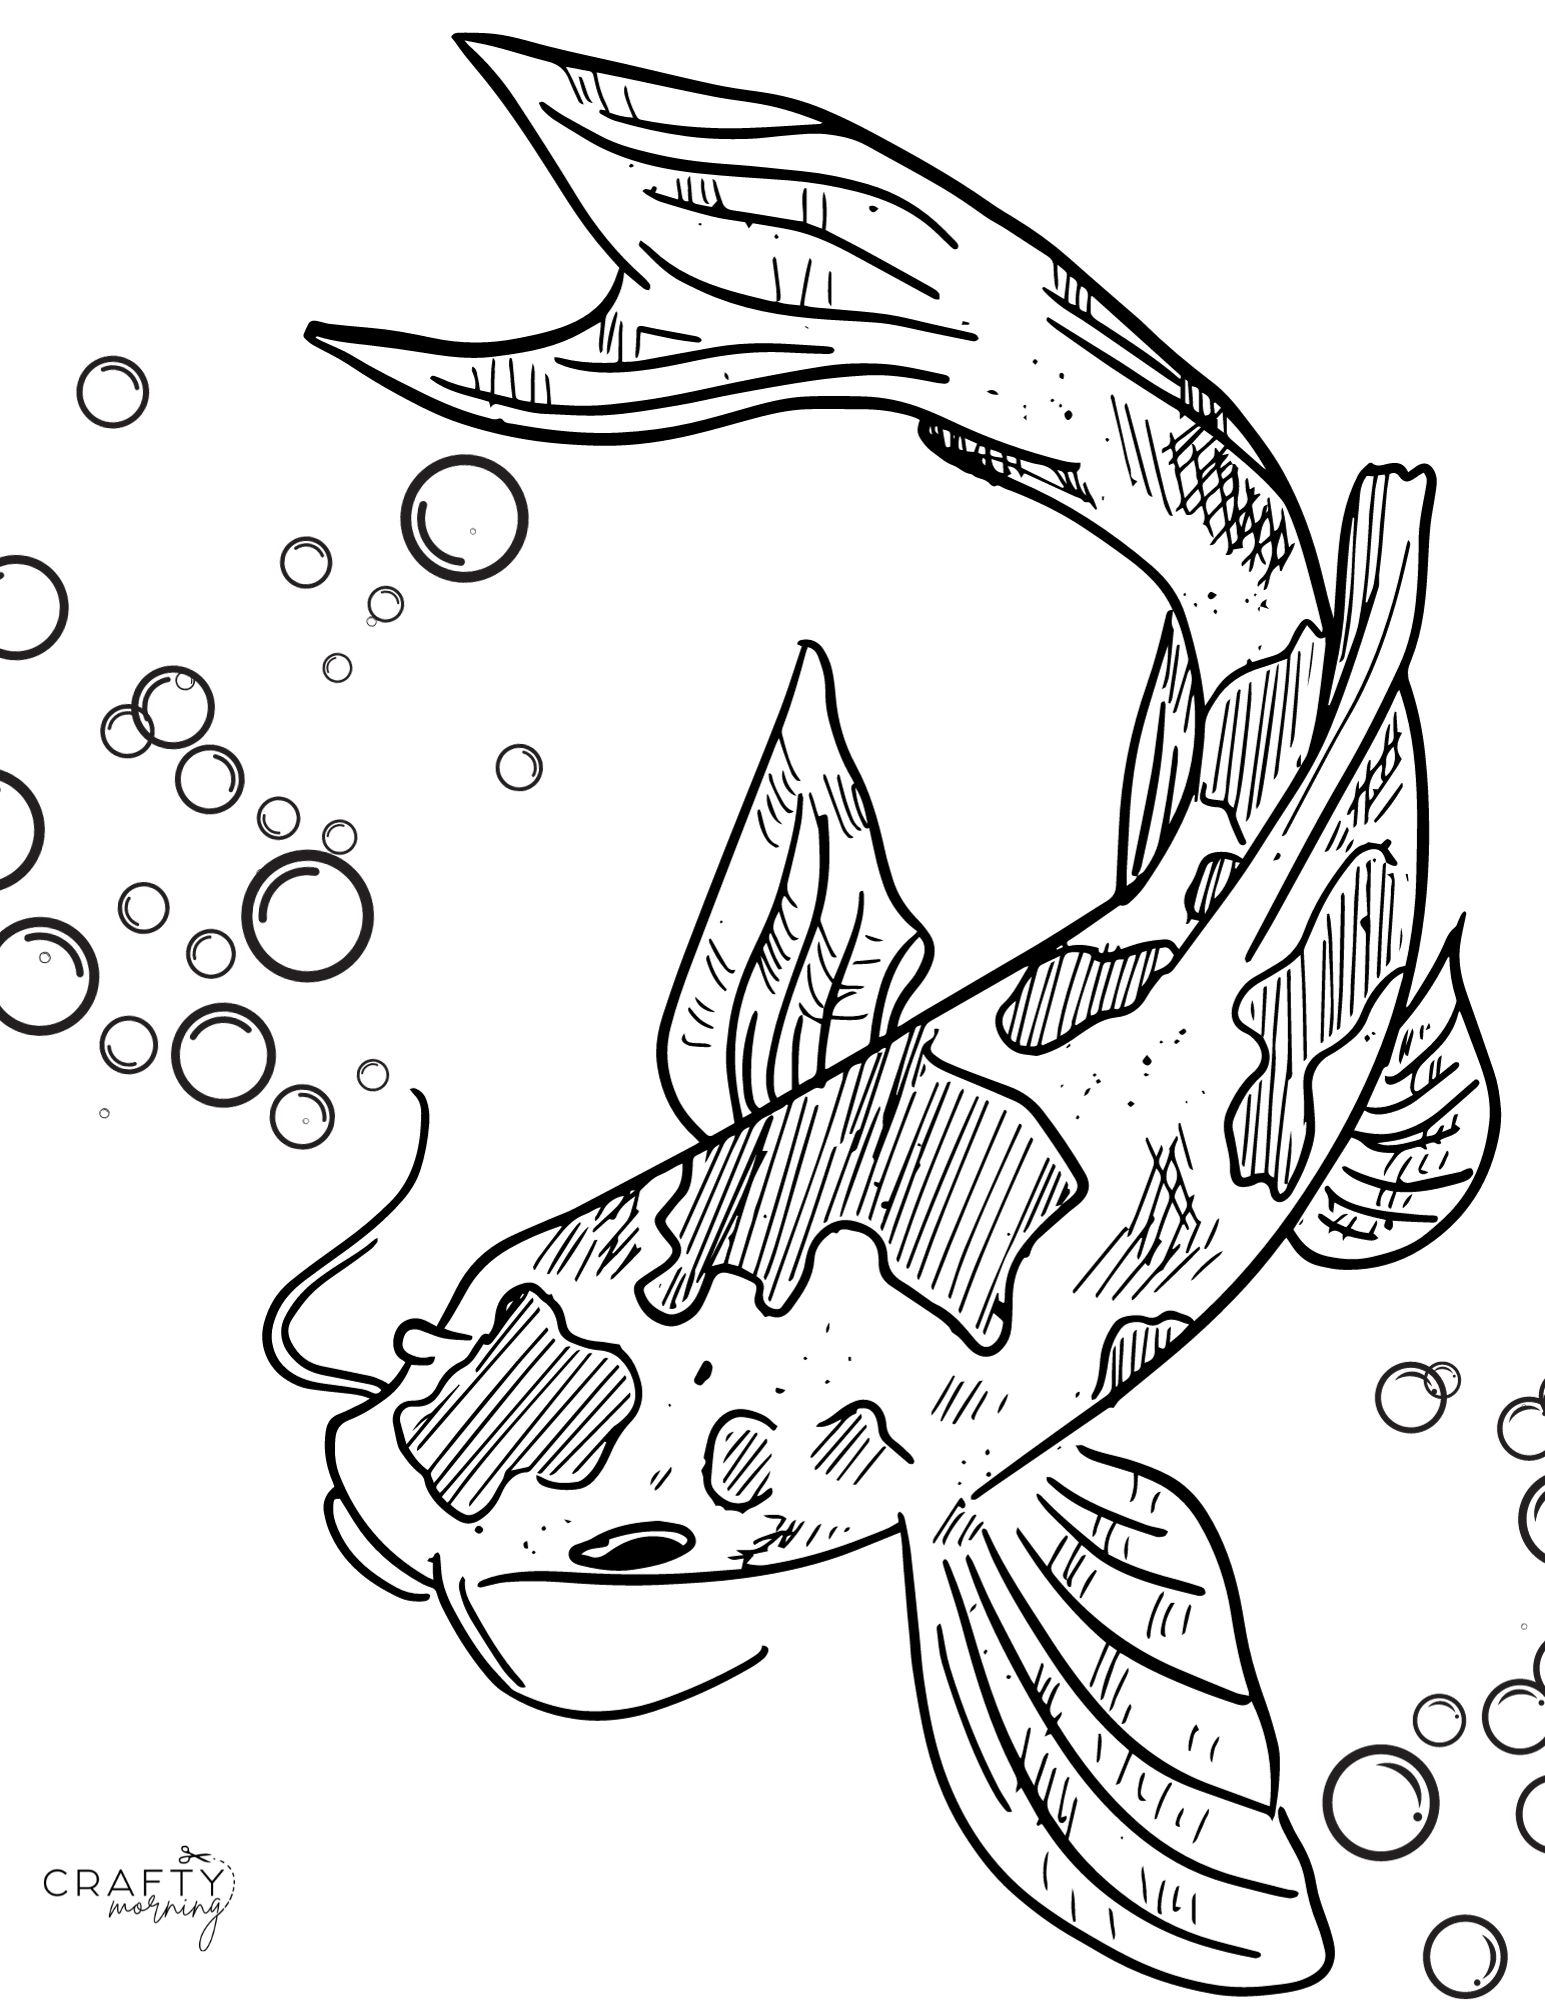 Easy How to Draw a Fish Tutorial and Fish Coloring Page